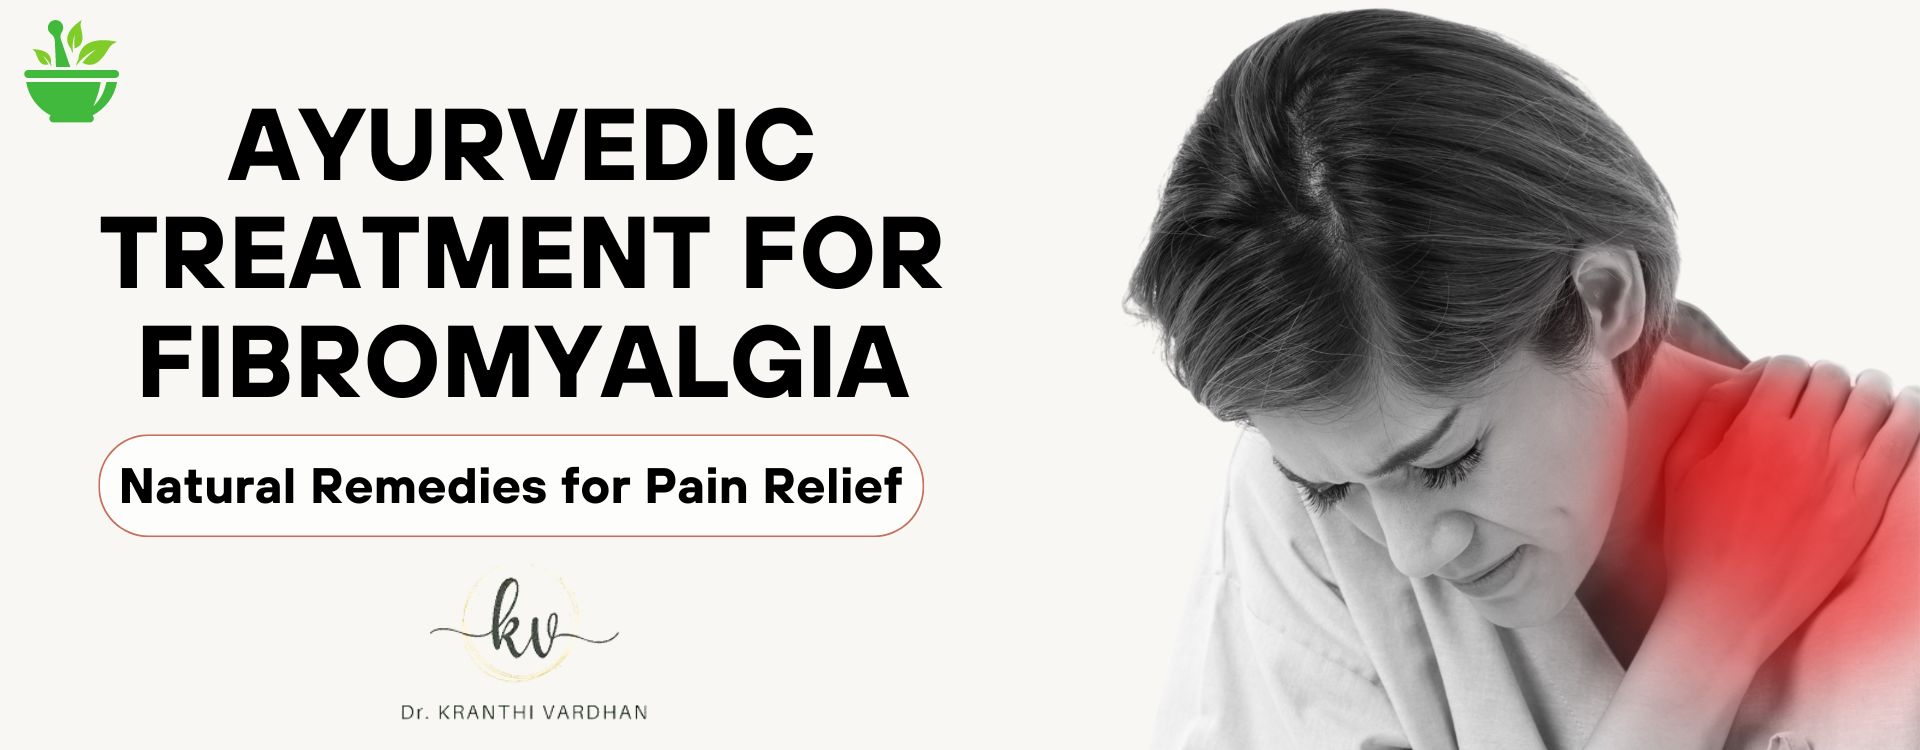 Ayurvedic Treatment for Fibromyalgia: Natural Remedies for Pain Relief